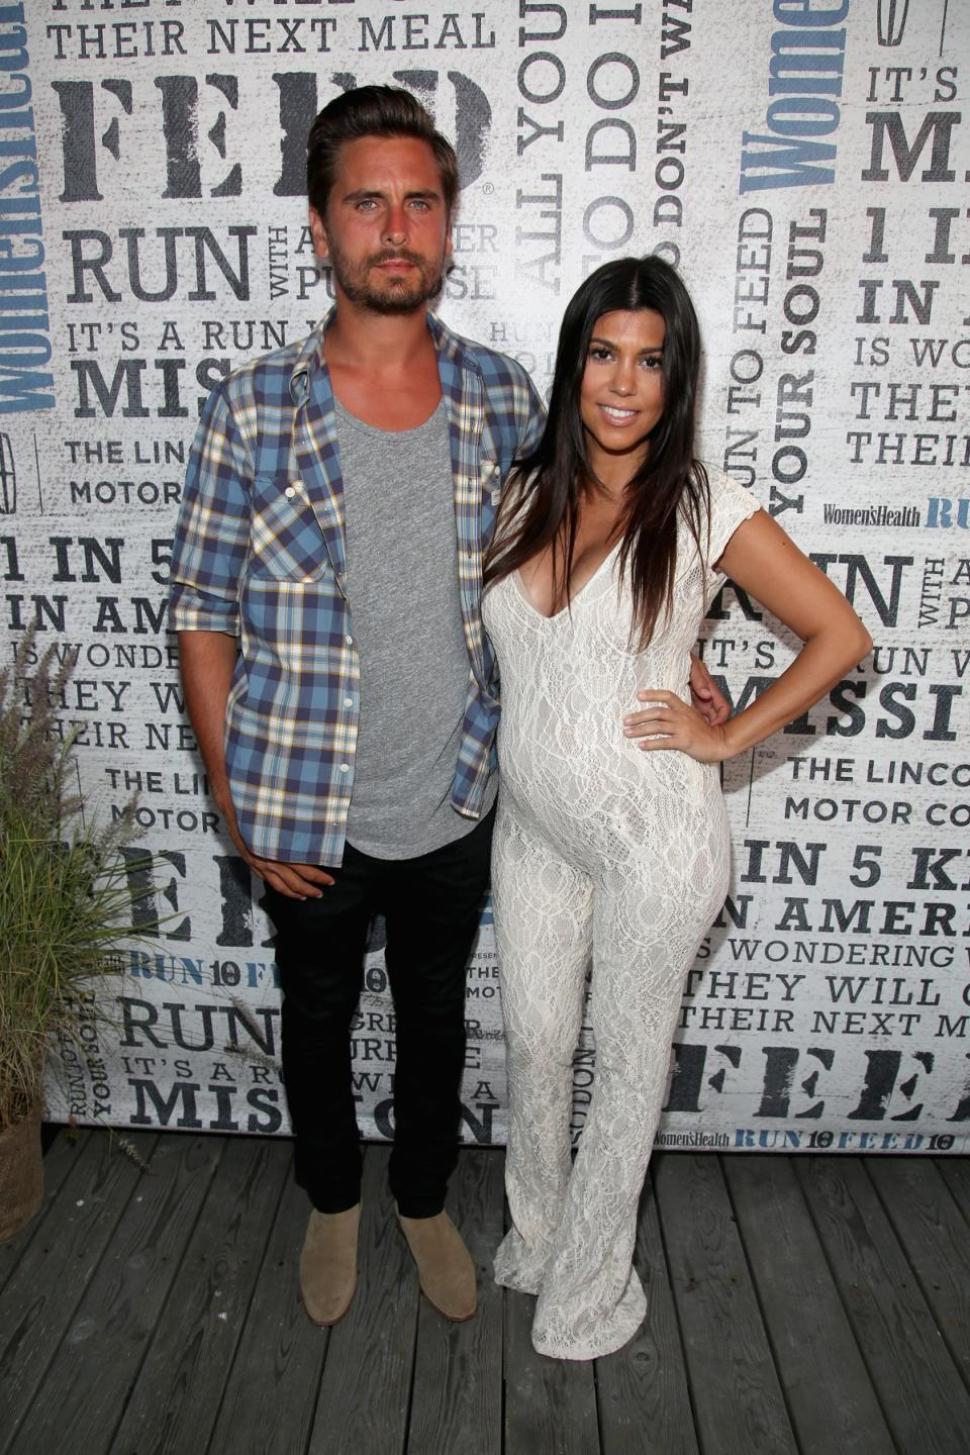 Kourtney Kardashian and Scott Disick welcomed baby Reign on the same day their oldest son, Mason, turned 5-years-old.